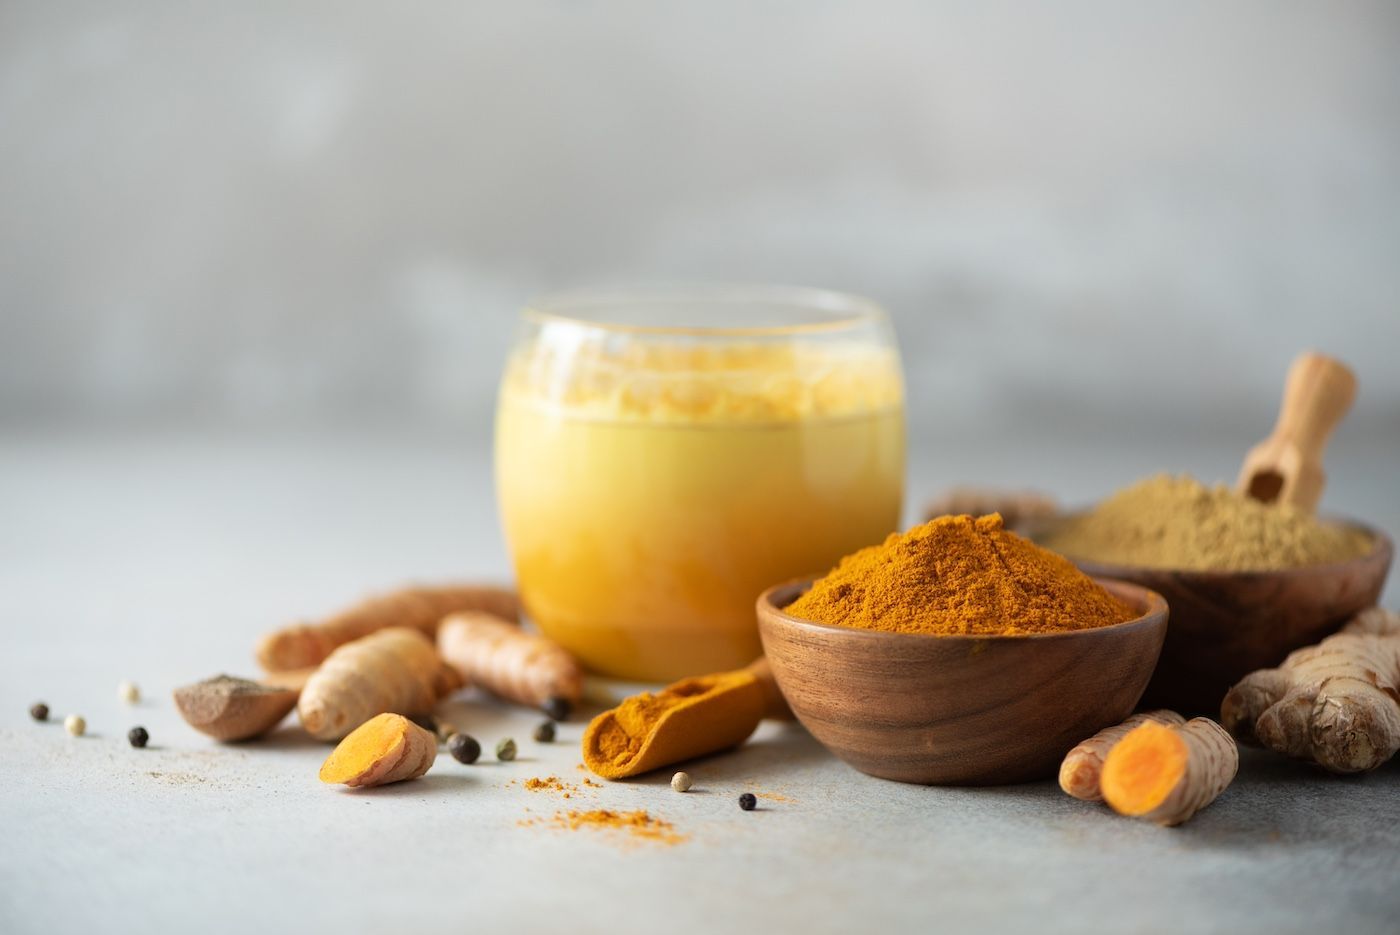 Turmeric Is an Indian Root That Is Primarily Dried & Ground Into a Spice. It Has a Warm Taste.